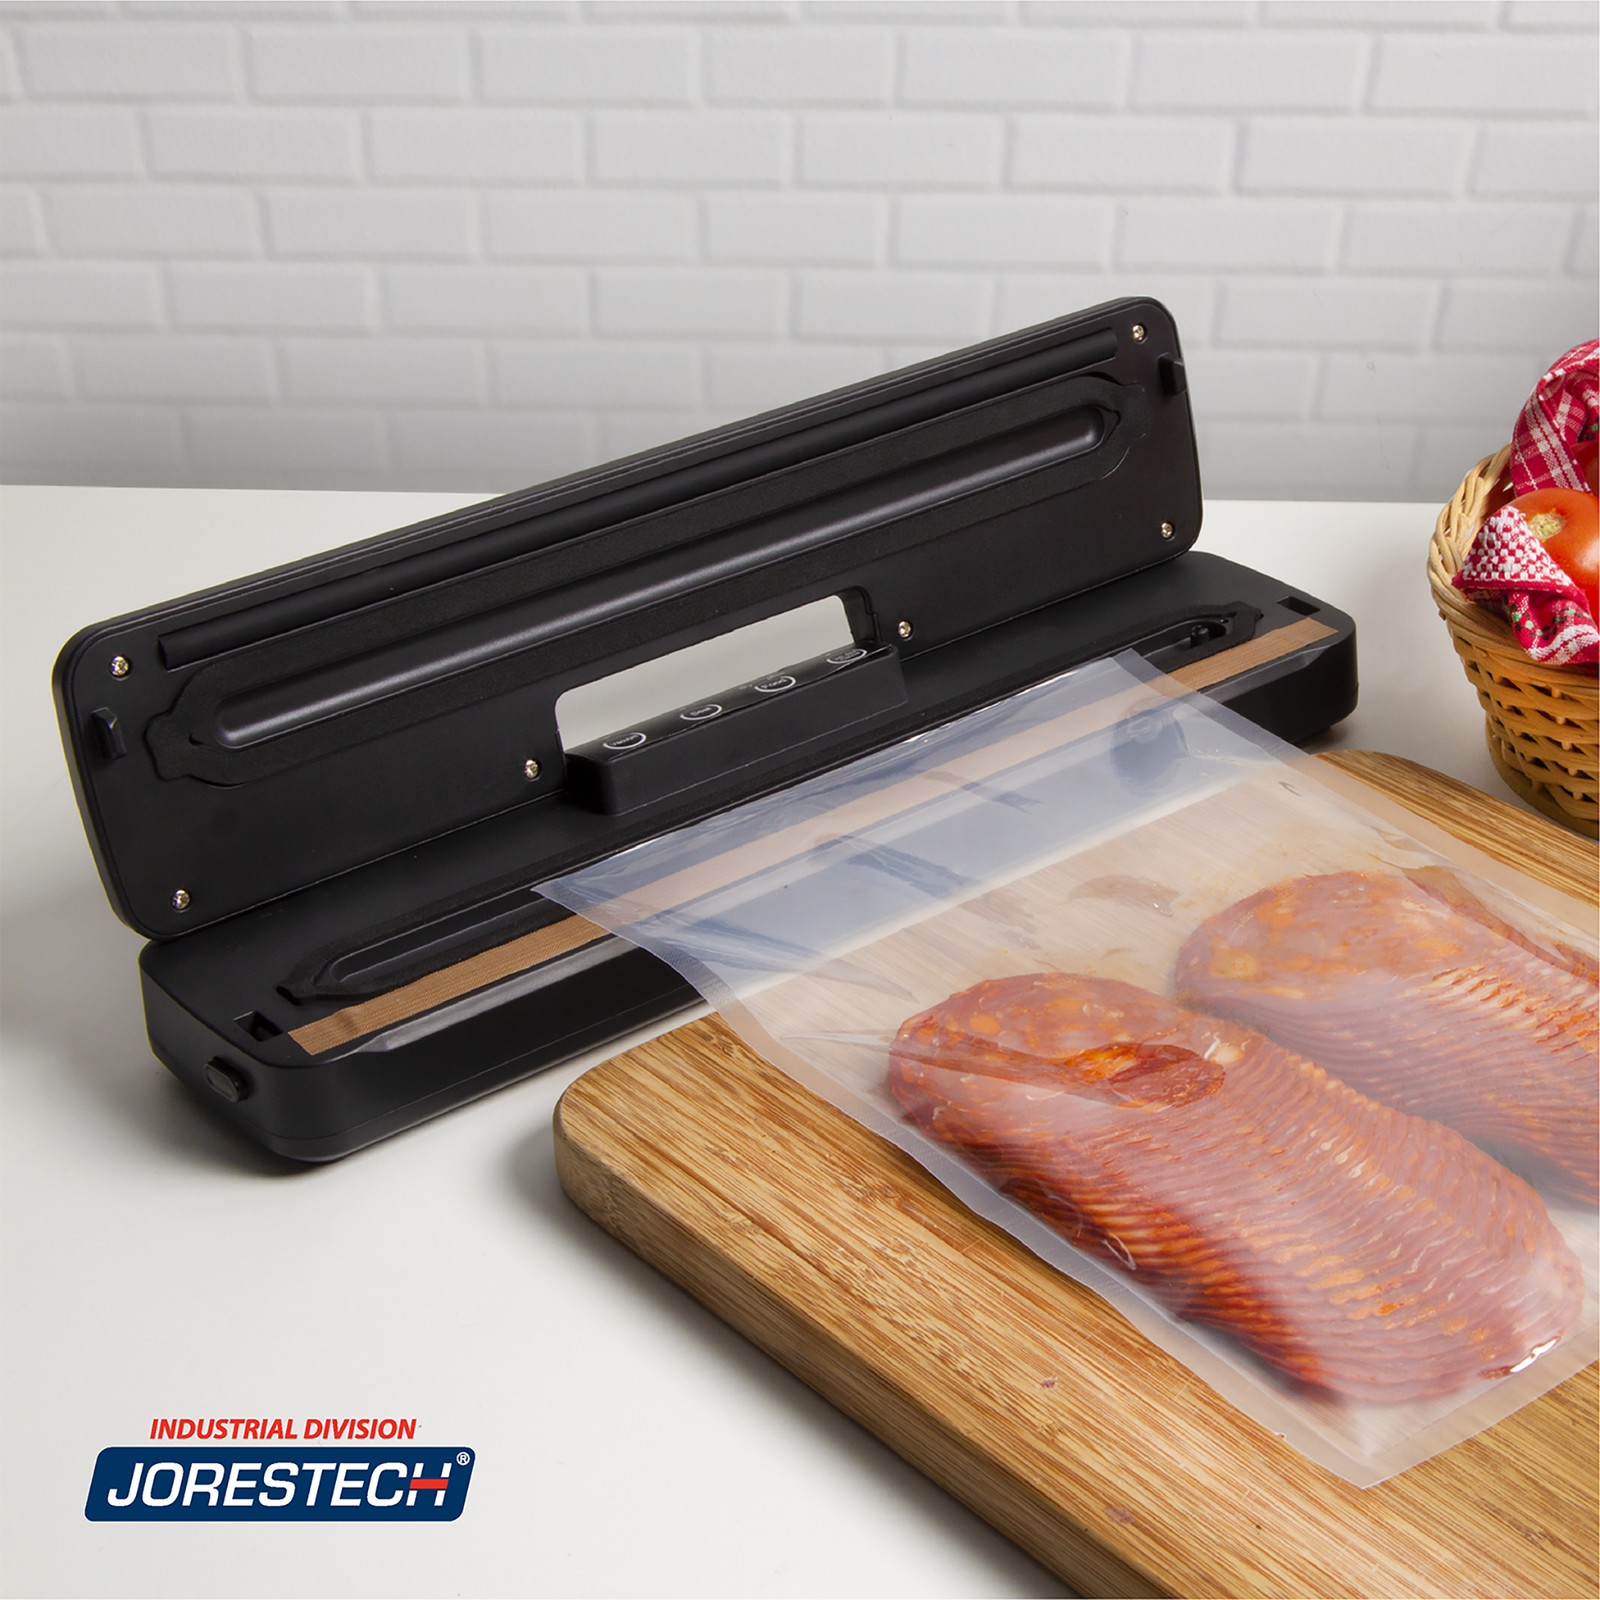 Black JORESTECH® vacuum sealing machine for home use on a kitchen counter. an embossed vacuum pouch filled with Salamy lays on a wooden board next to the sealing machine, ready to be packaged. 